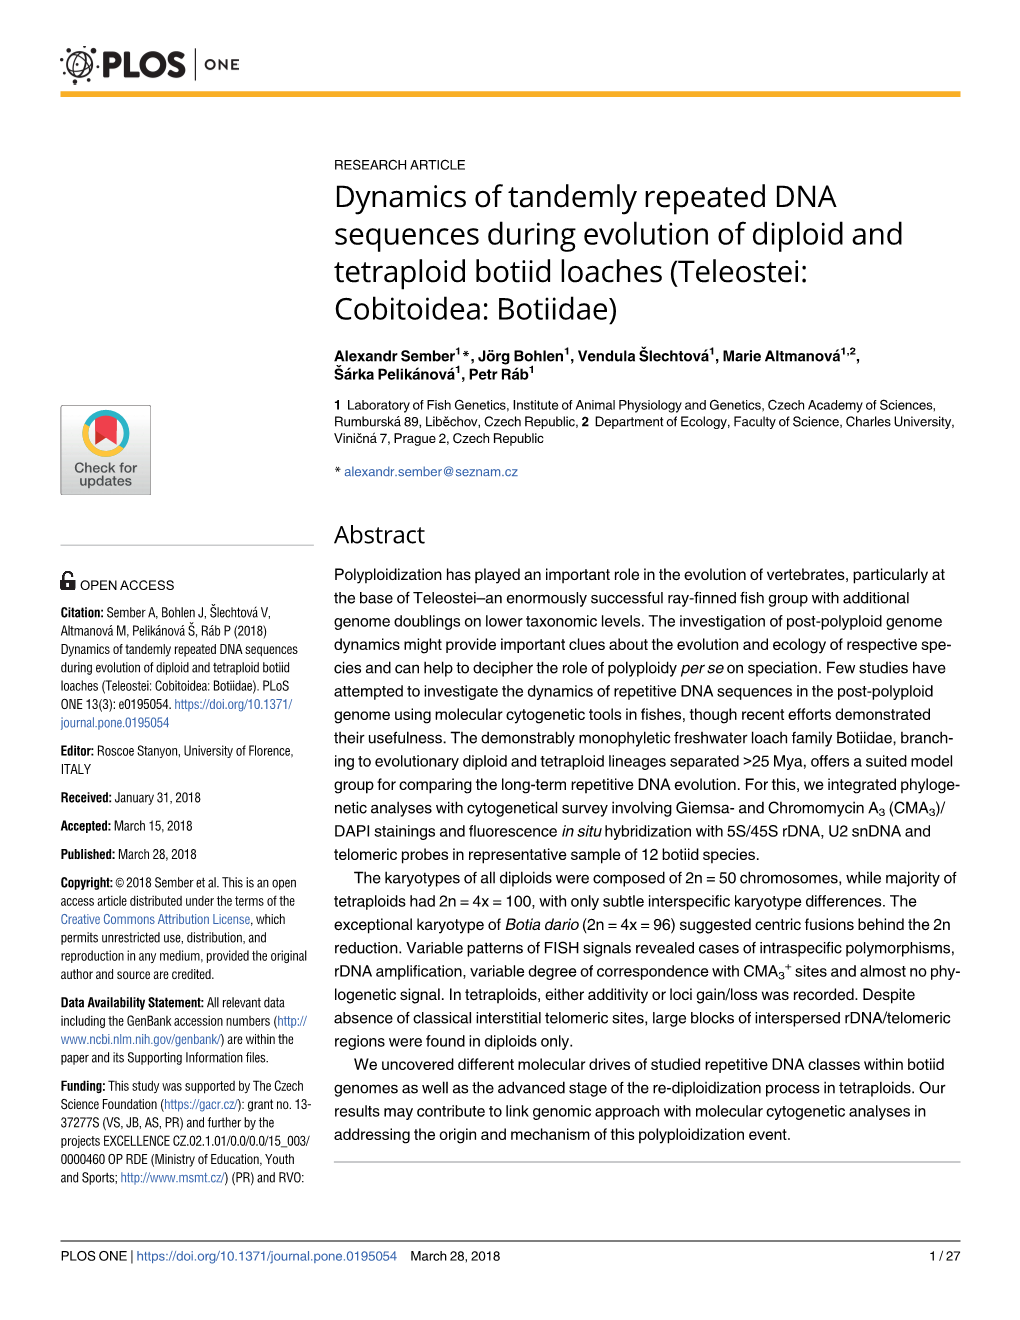 Dynamics of Tandemly Repeated DNA Sequences During Evolution of Diploid and Tetraploid Botiid Loaches (Teleostei: Cobitoidea: Botiidae)